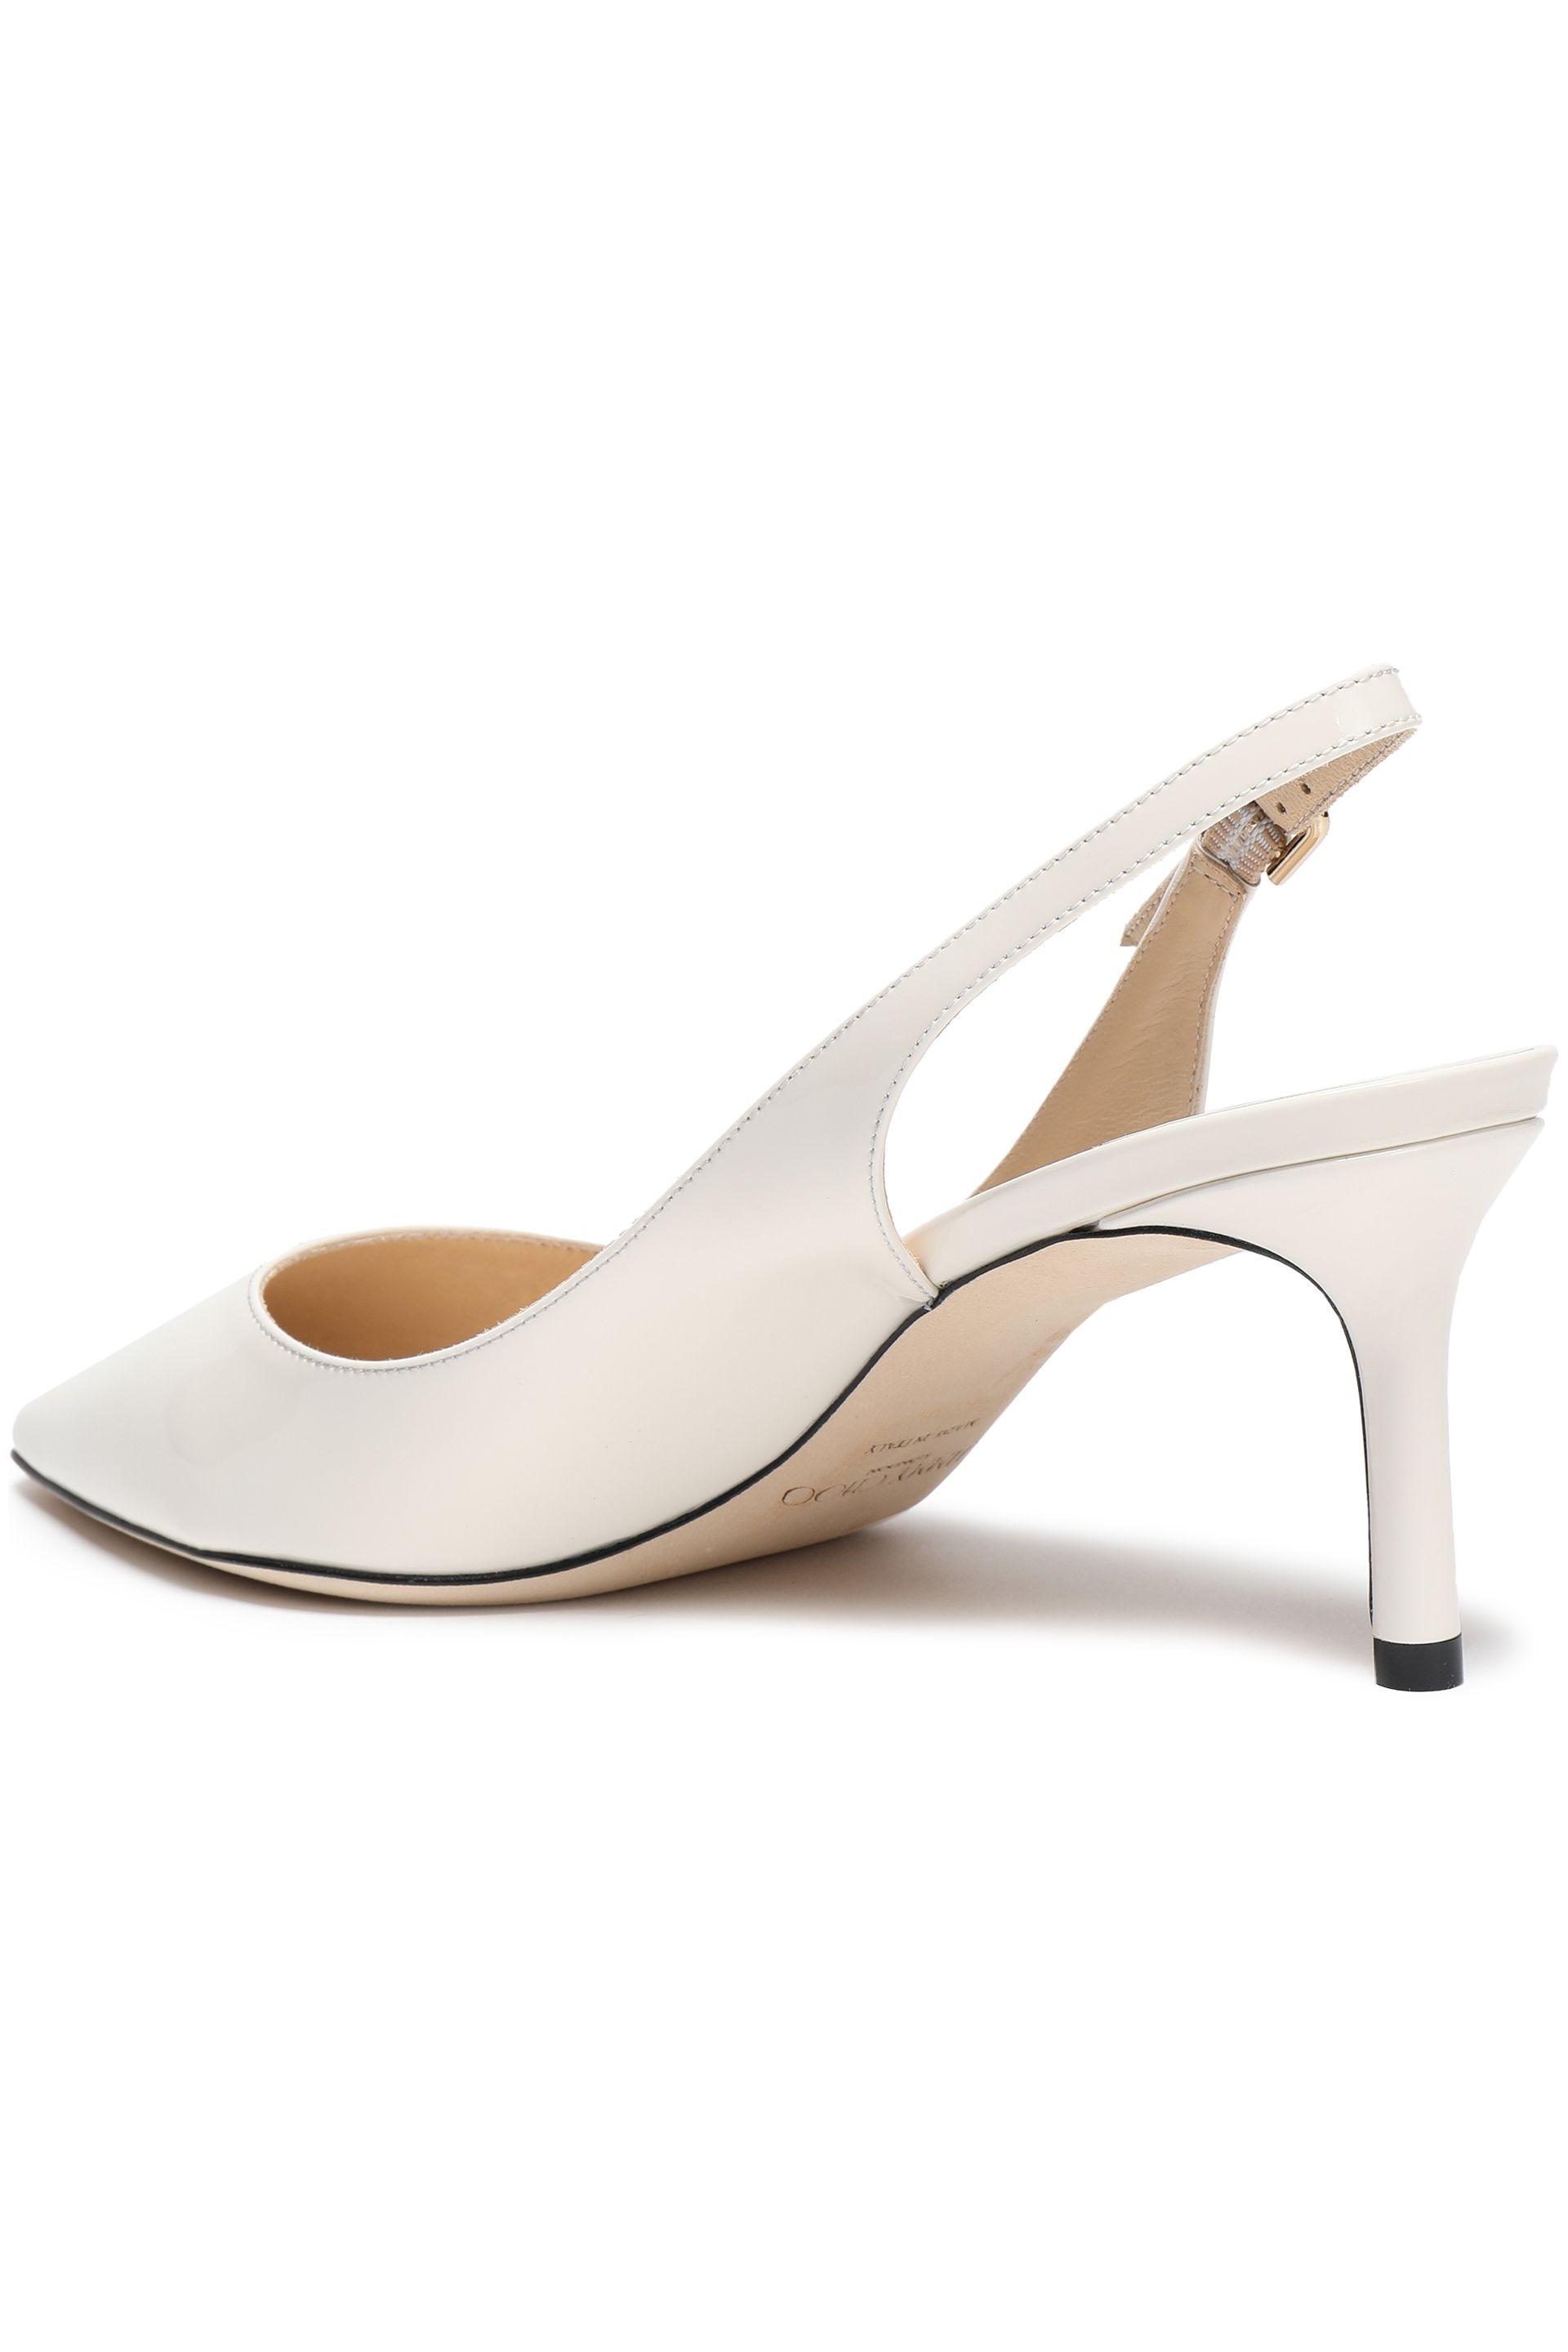 Jimmy Choo Erin 60 Patent-leather Slingback Pumps Off-white - Lyst